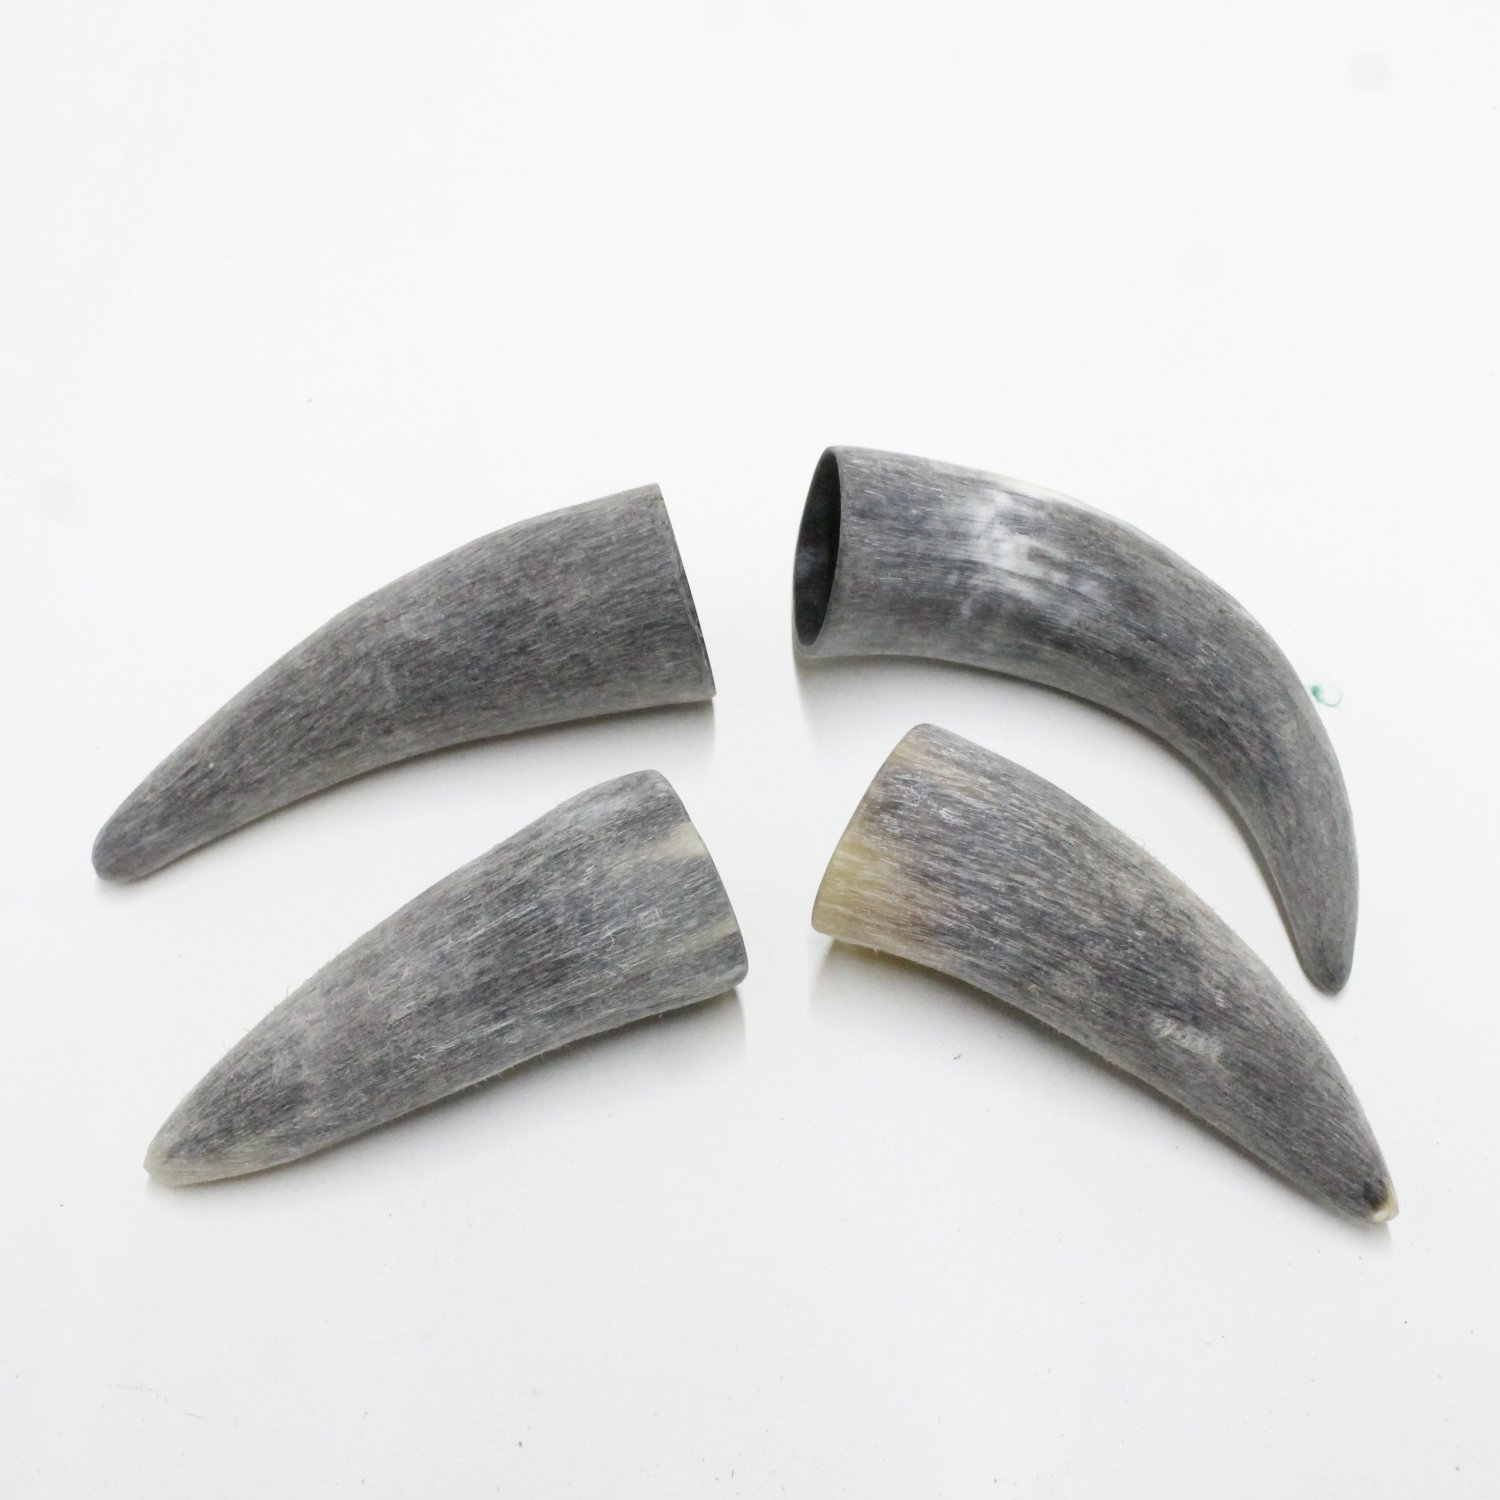 4 Raw Cow horn tips #40N Natural colored rendezvous replica powwow